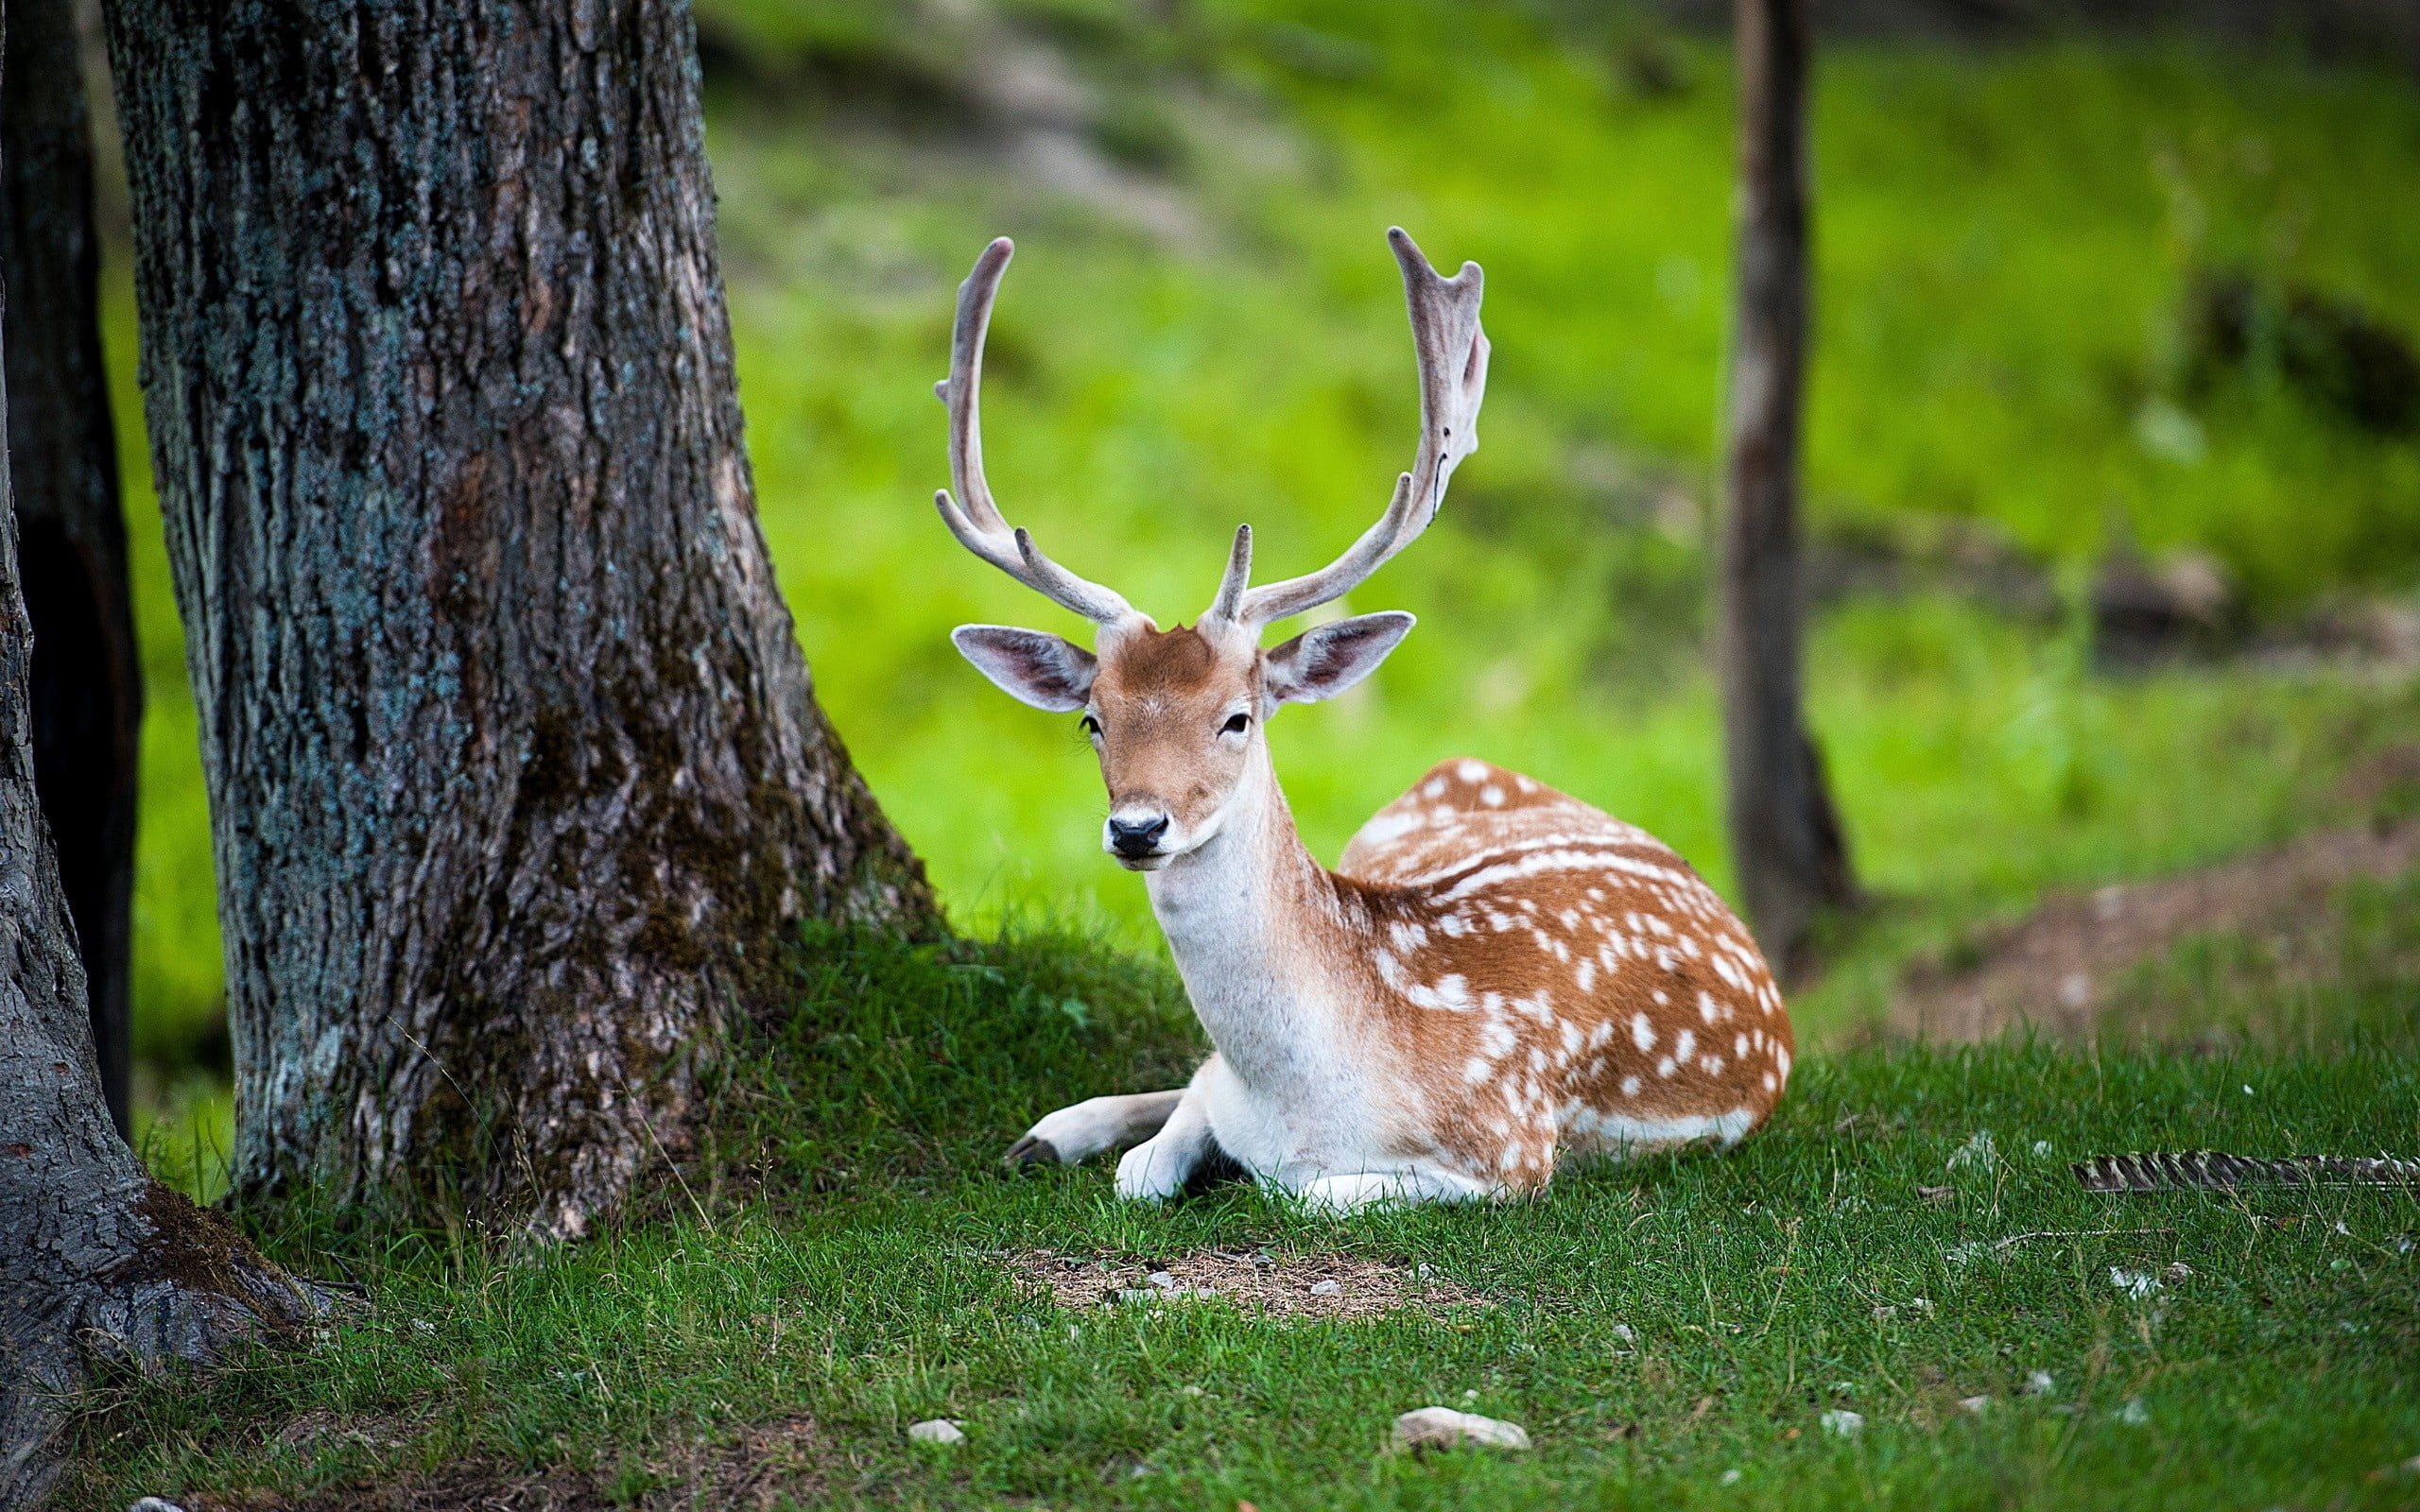 brown and white deer, tree, lie, color, forest, wildlife, nature